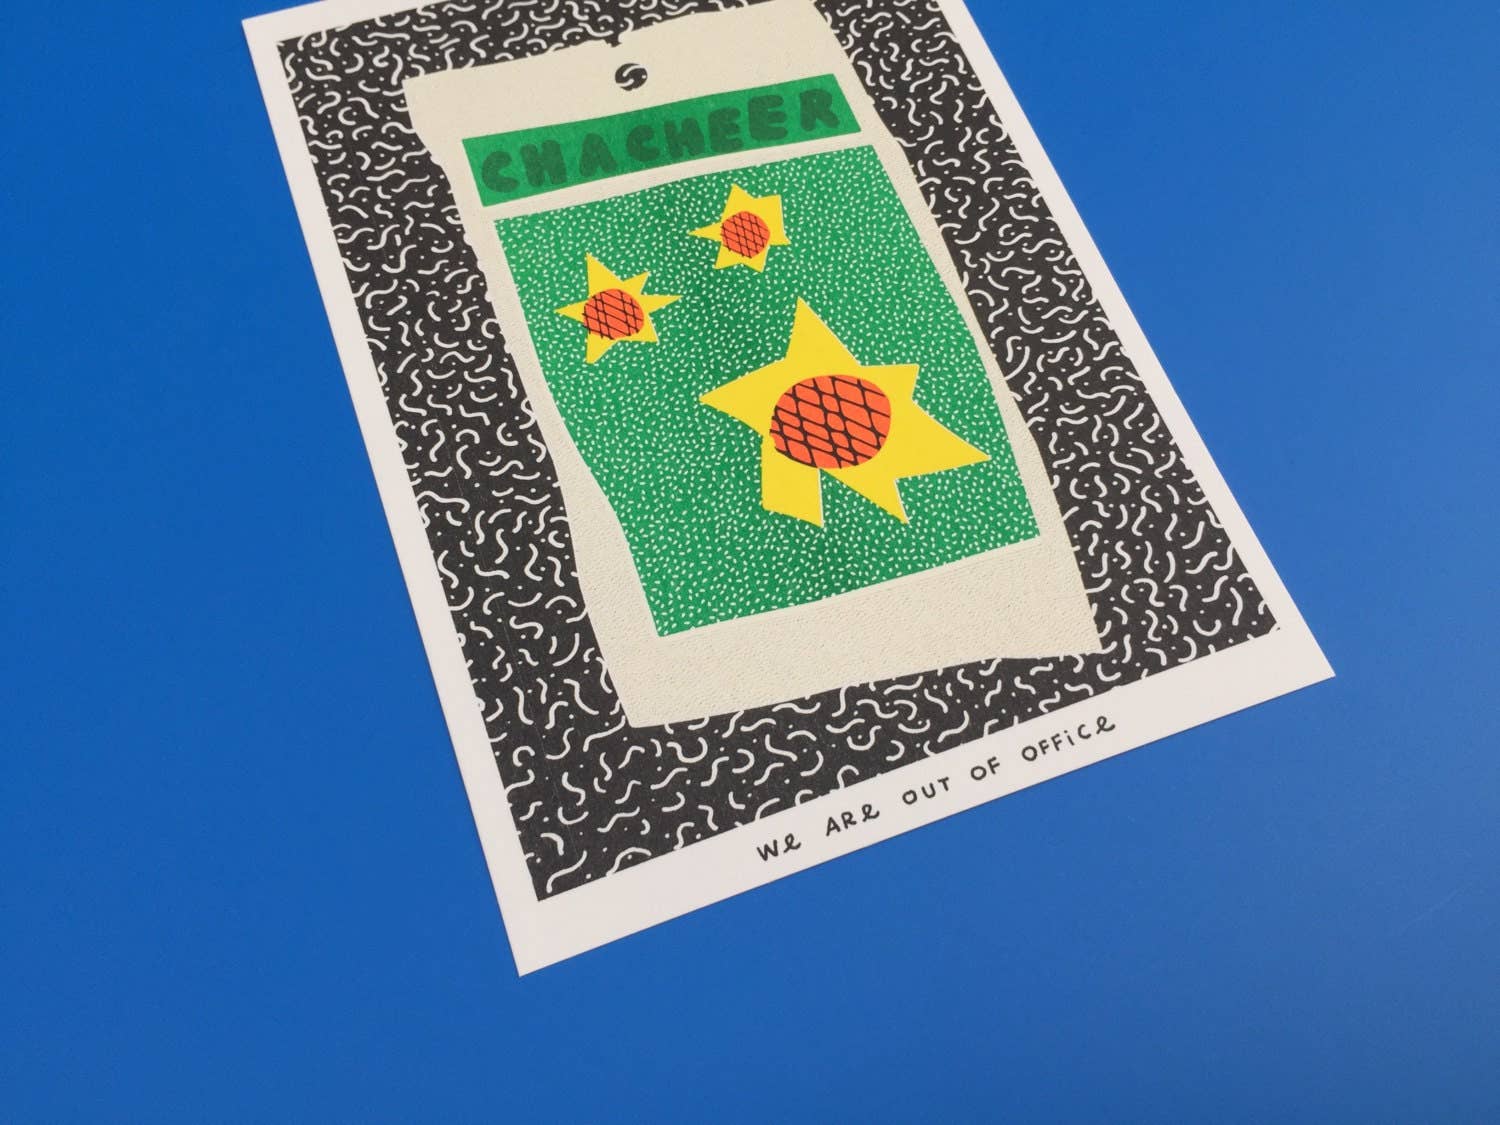 We Are Out of Office - A Risograph Print of a Colourful Bag Sunflower Seeds - Ensemble Studios